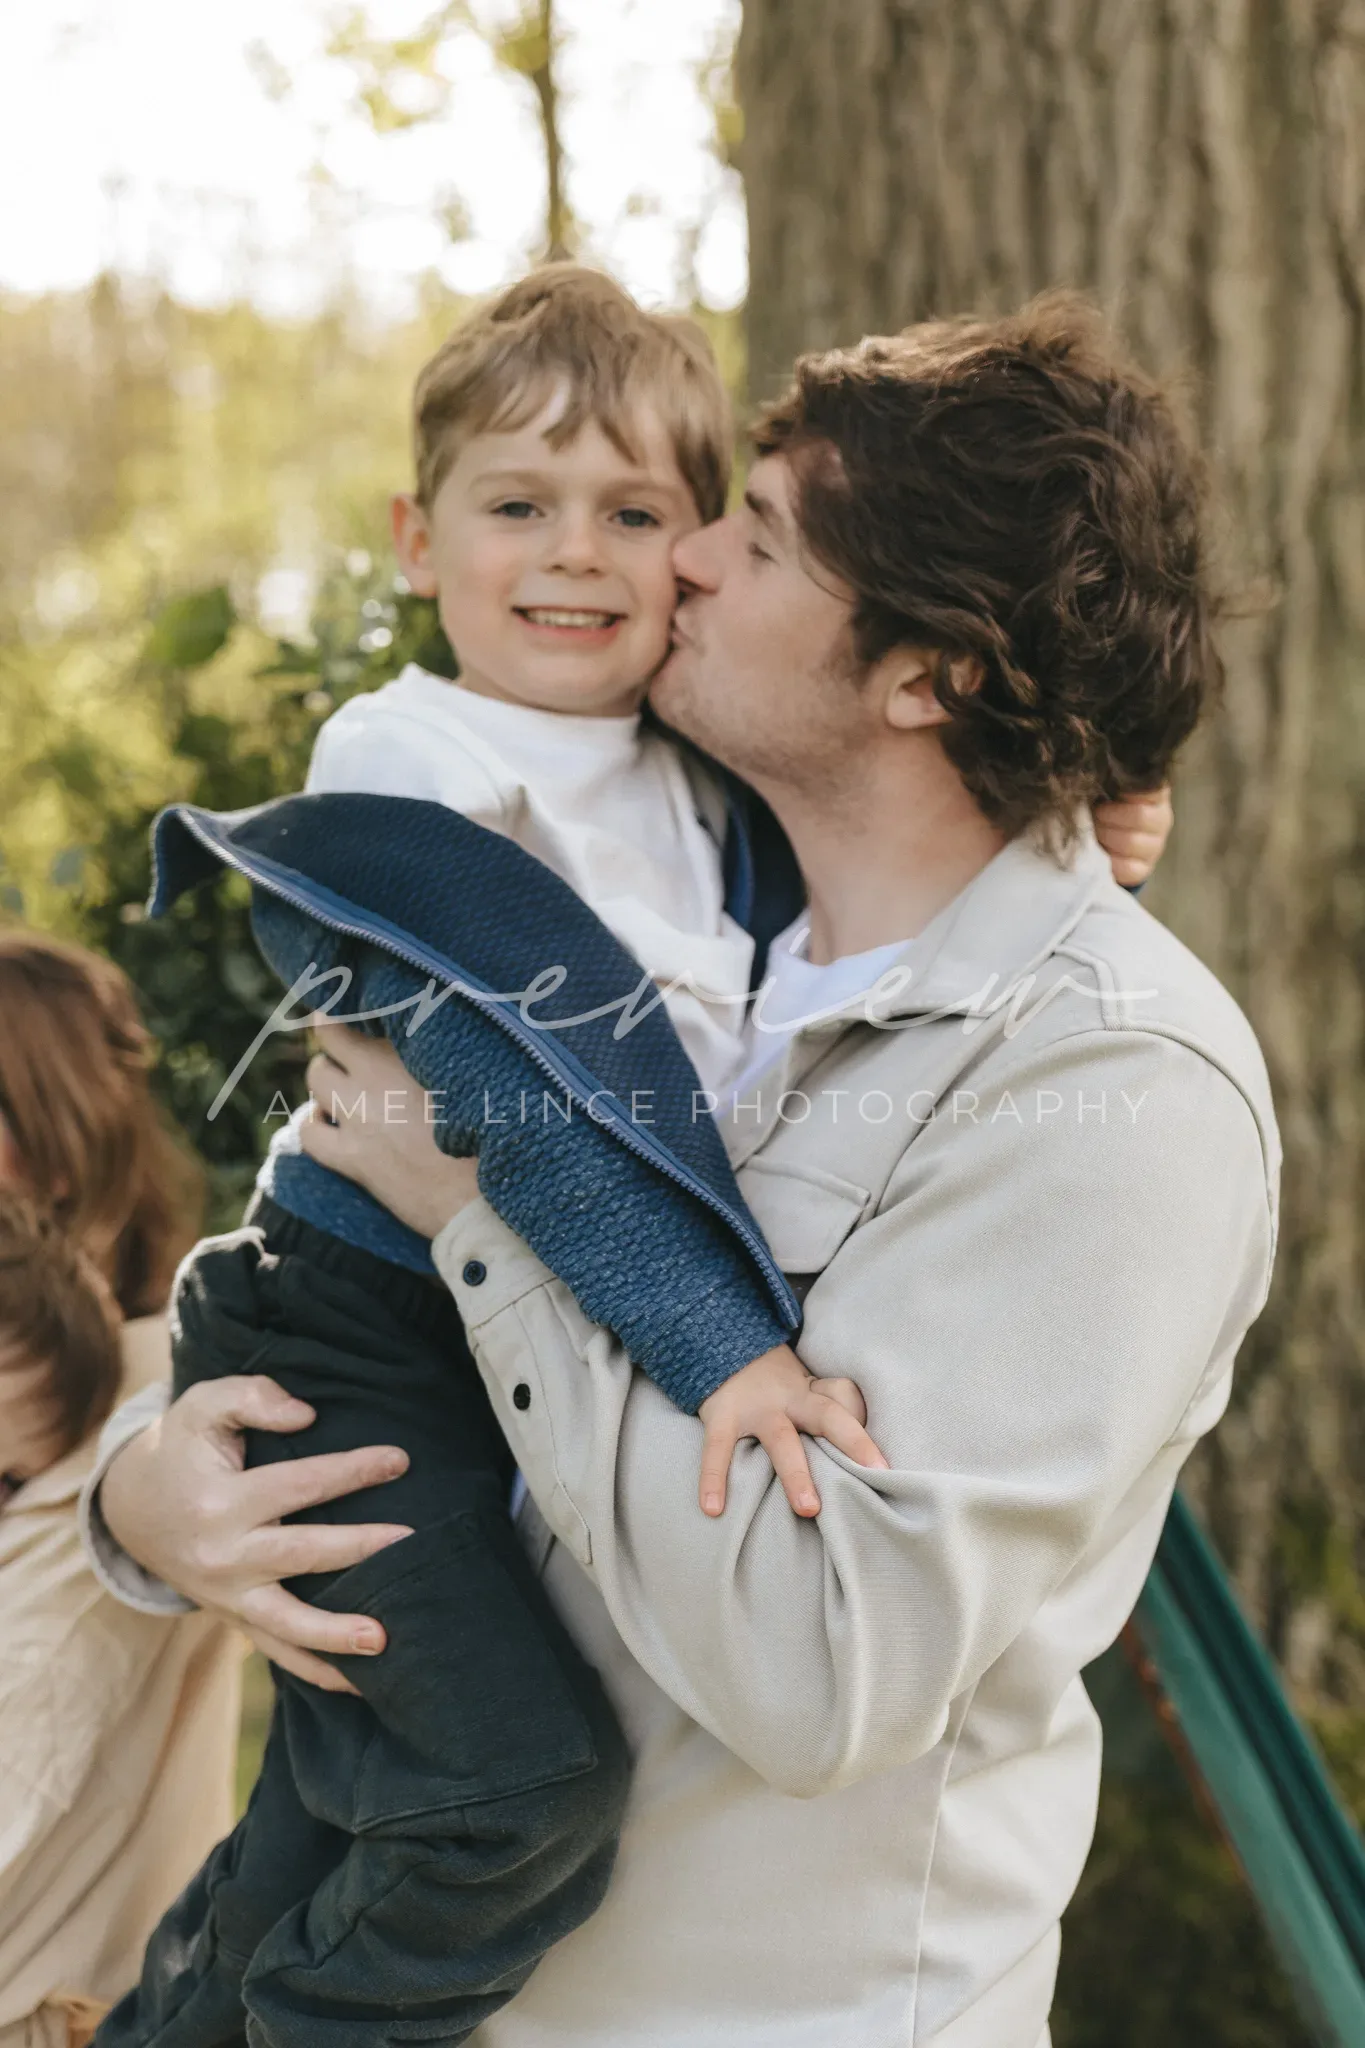 A father tenderly kisses his smiling young son on the cheek while holding him in his arms outdoors, with trees in the background illuminated by soft sunlight.